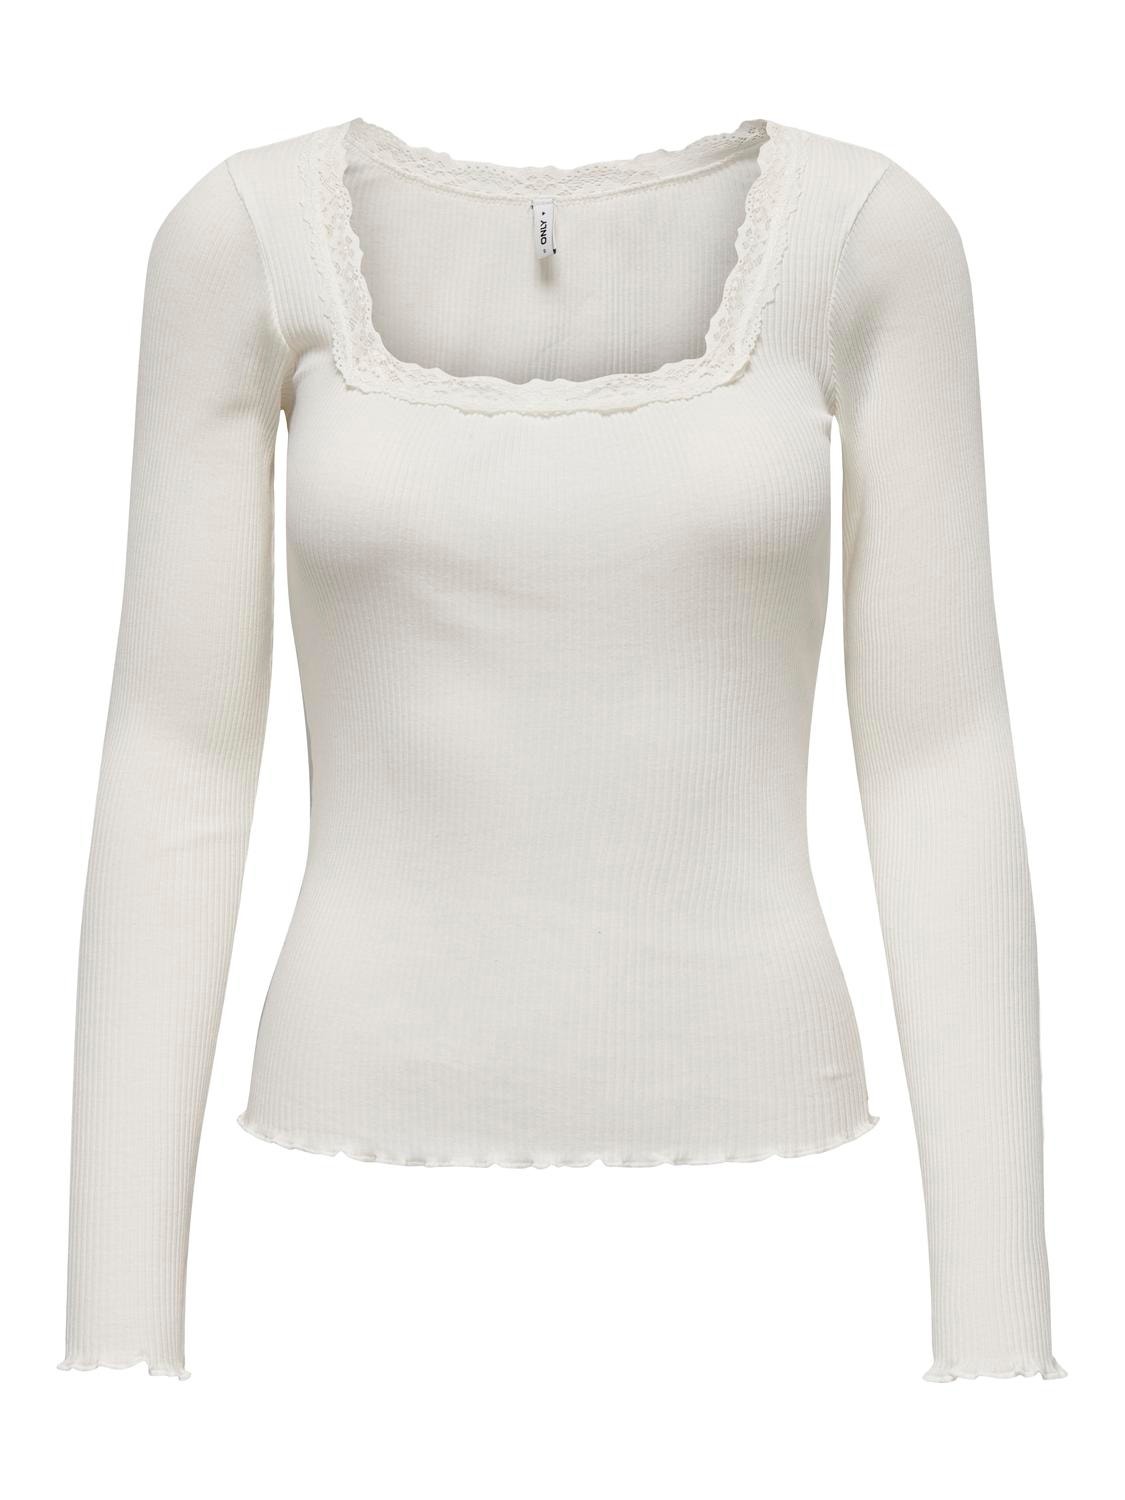 ONLY Square neck rib top -Cloud Dancer - 15302641